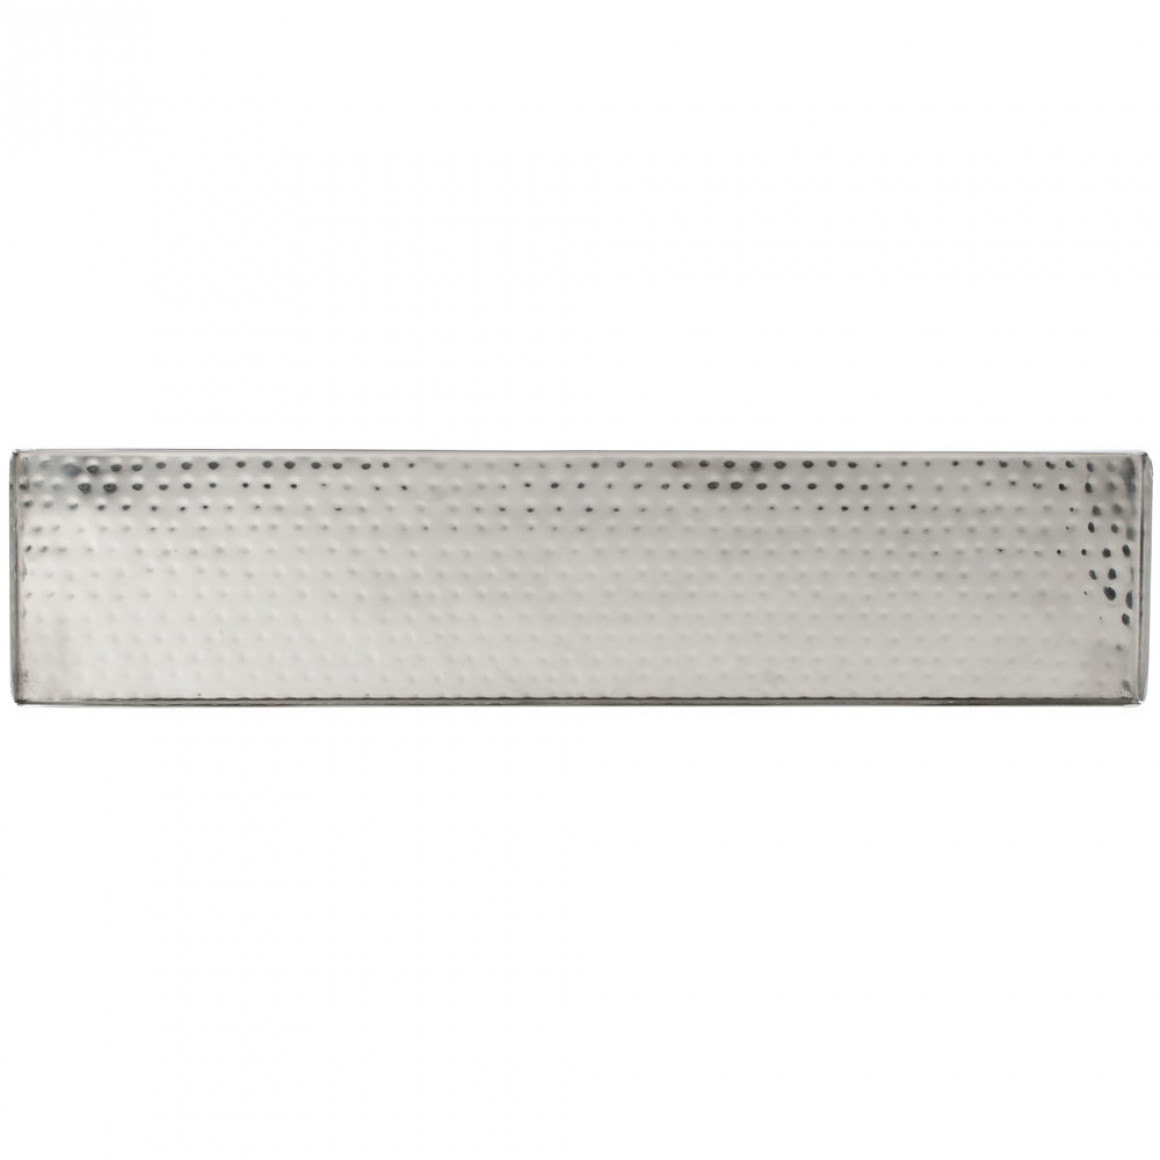 STAINLESS STEEL, HAMMERED TRAY WITH SIDES, 20-1/8